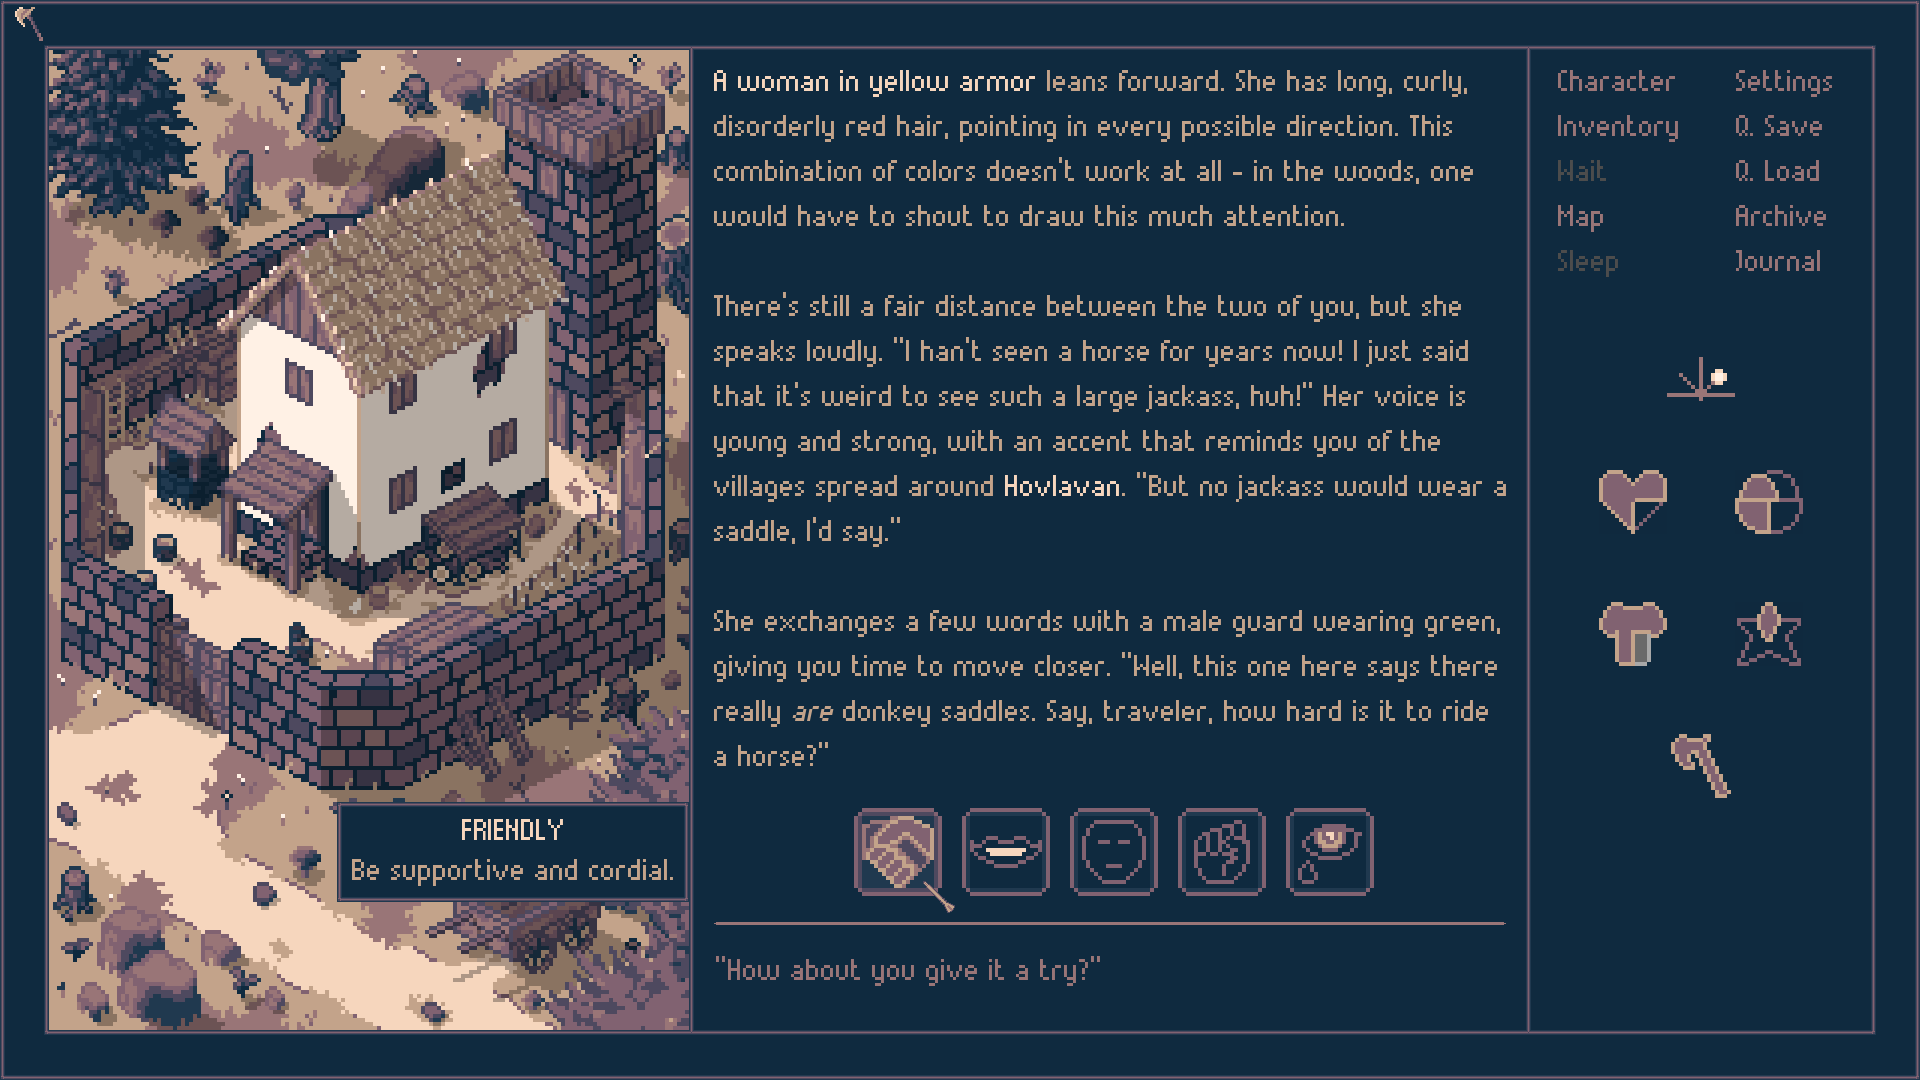 Roadwarden screenshot of a cabin and narrative describing a conversation about horses with an armored woman.